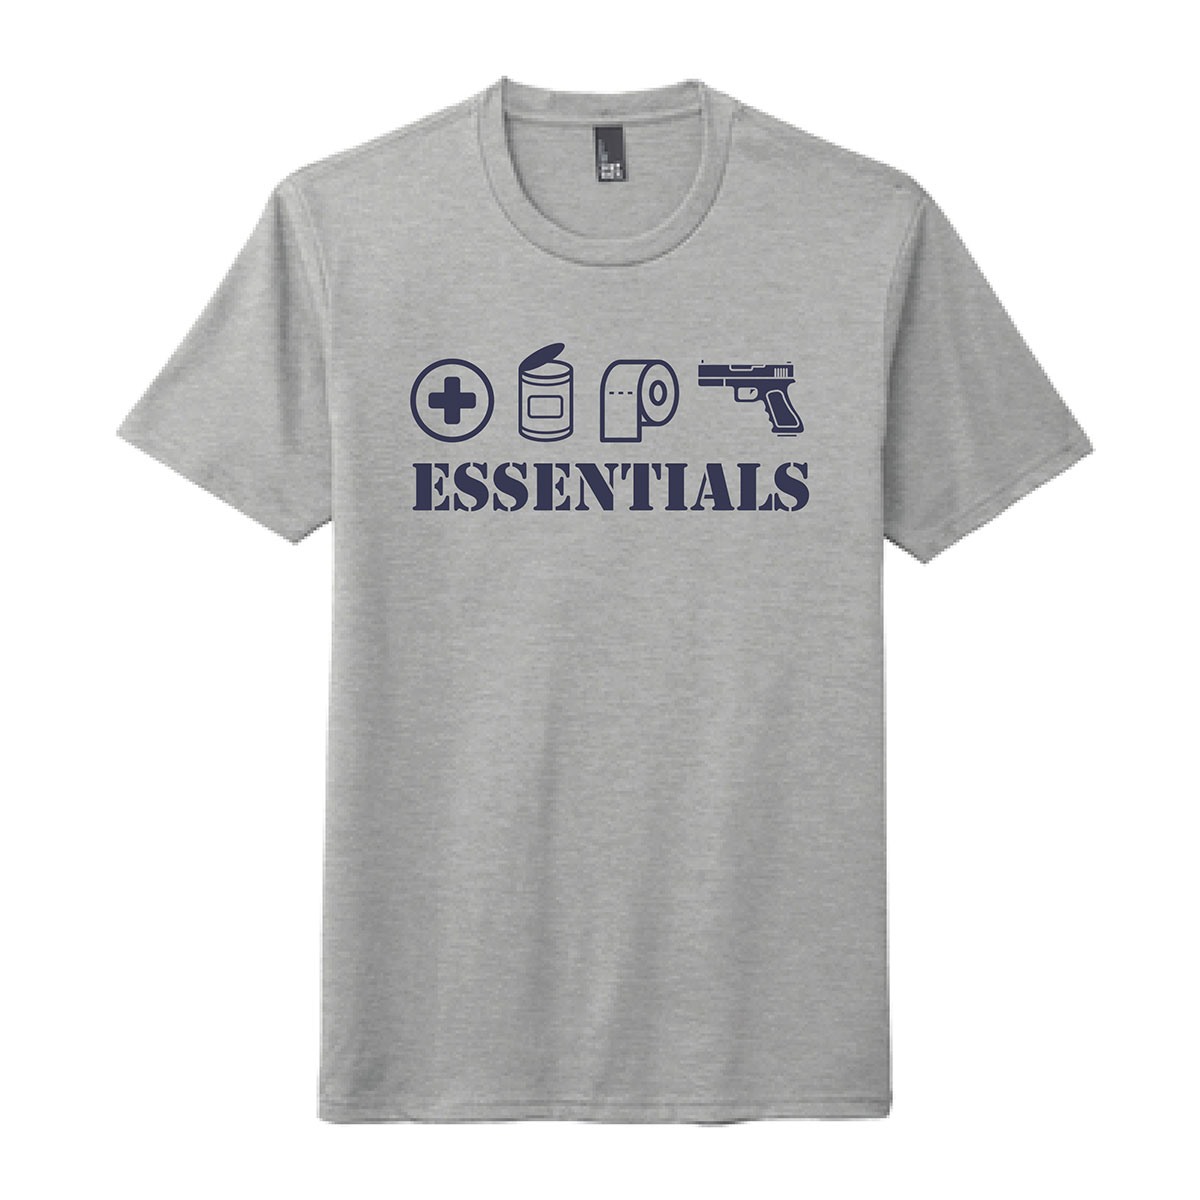 Picture of a Brownells Essentials T-Shirt